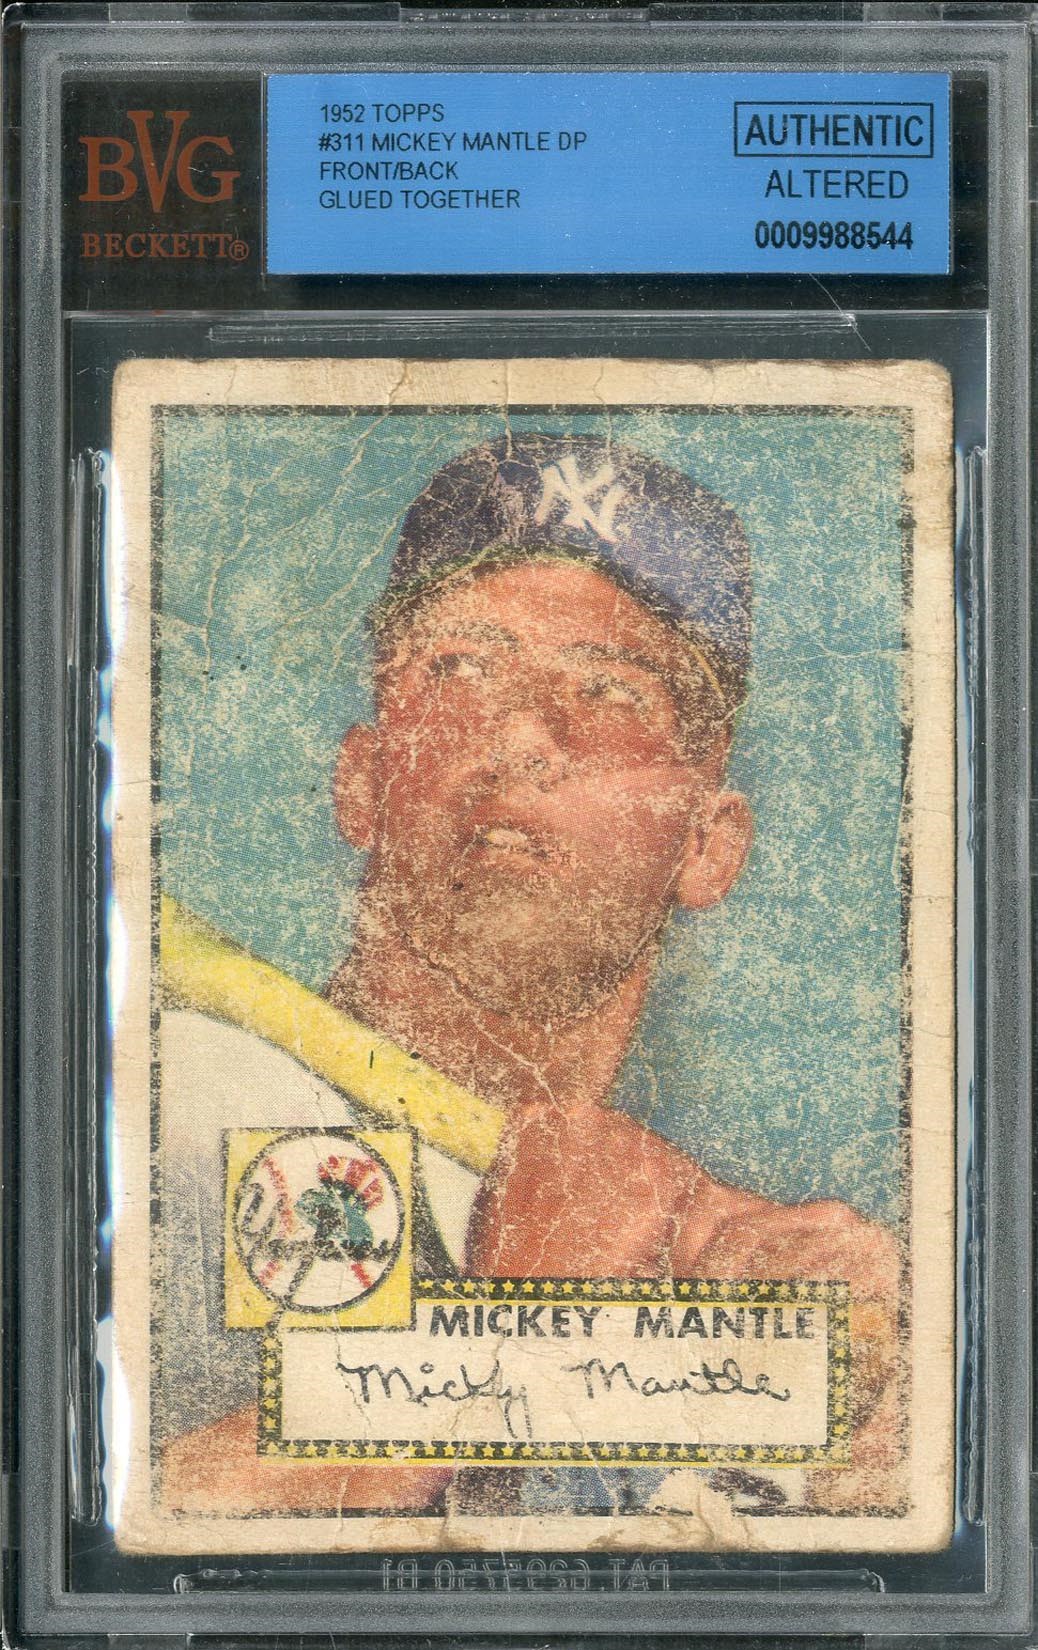 Baseball and Trading Cards - Centered 1952 Topps #311 Mickey Mantle Rookie (BVG Authentic)